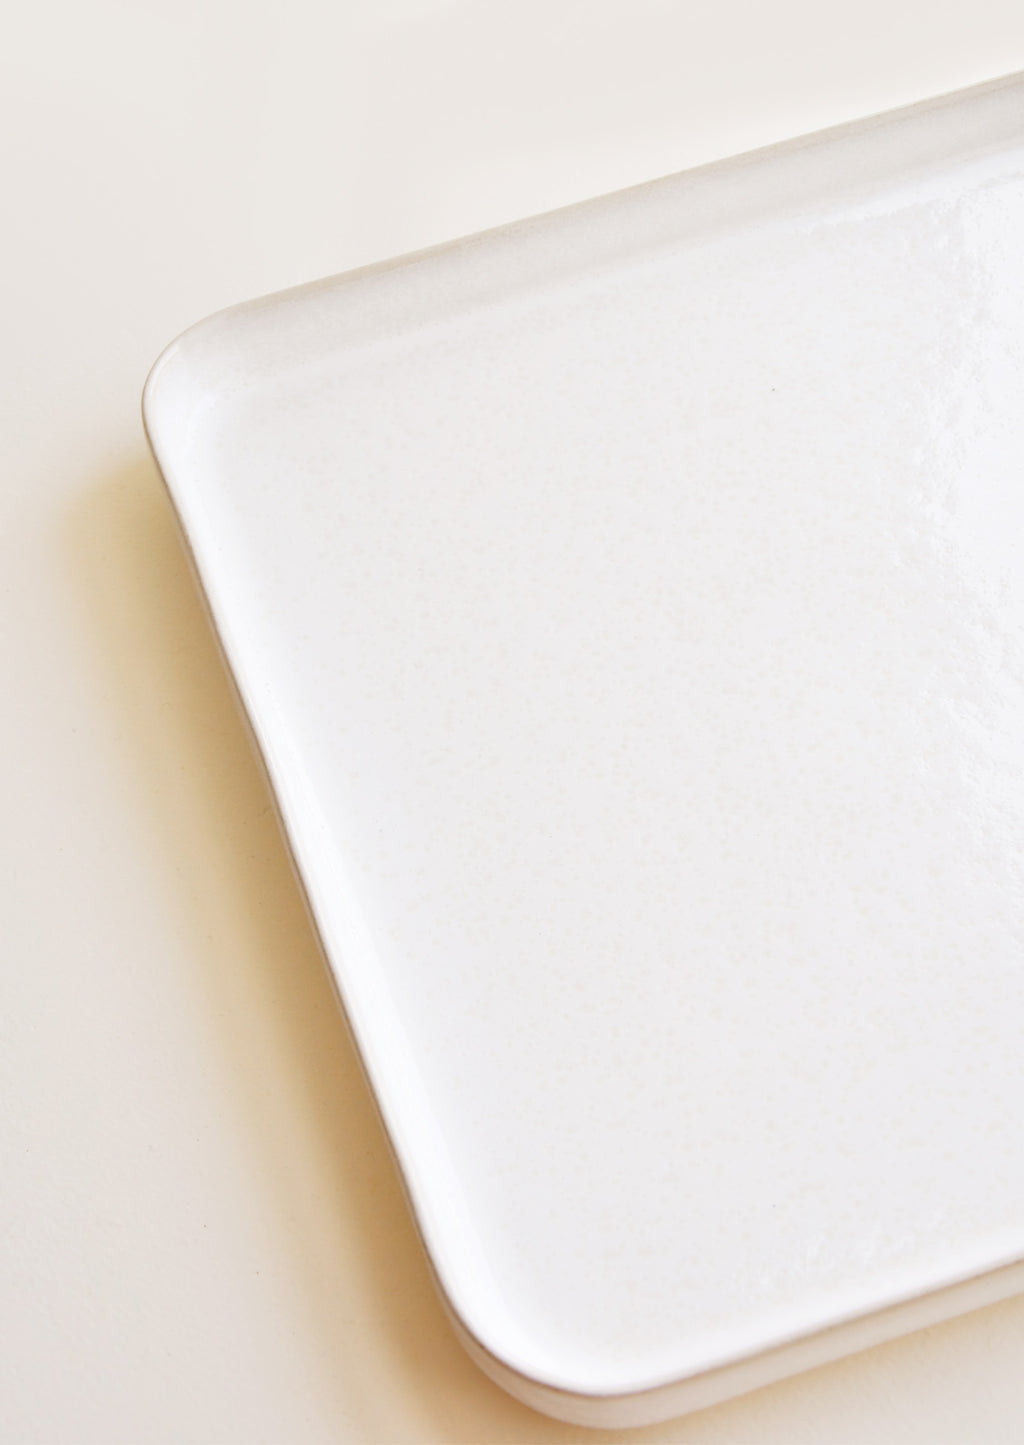 2: Detail of Square Ceramic Tray with Lipped Edge in Ivory.